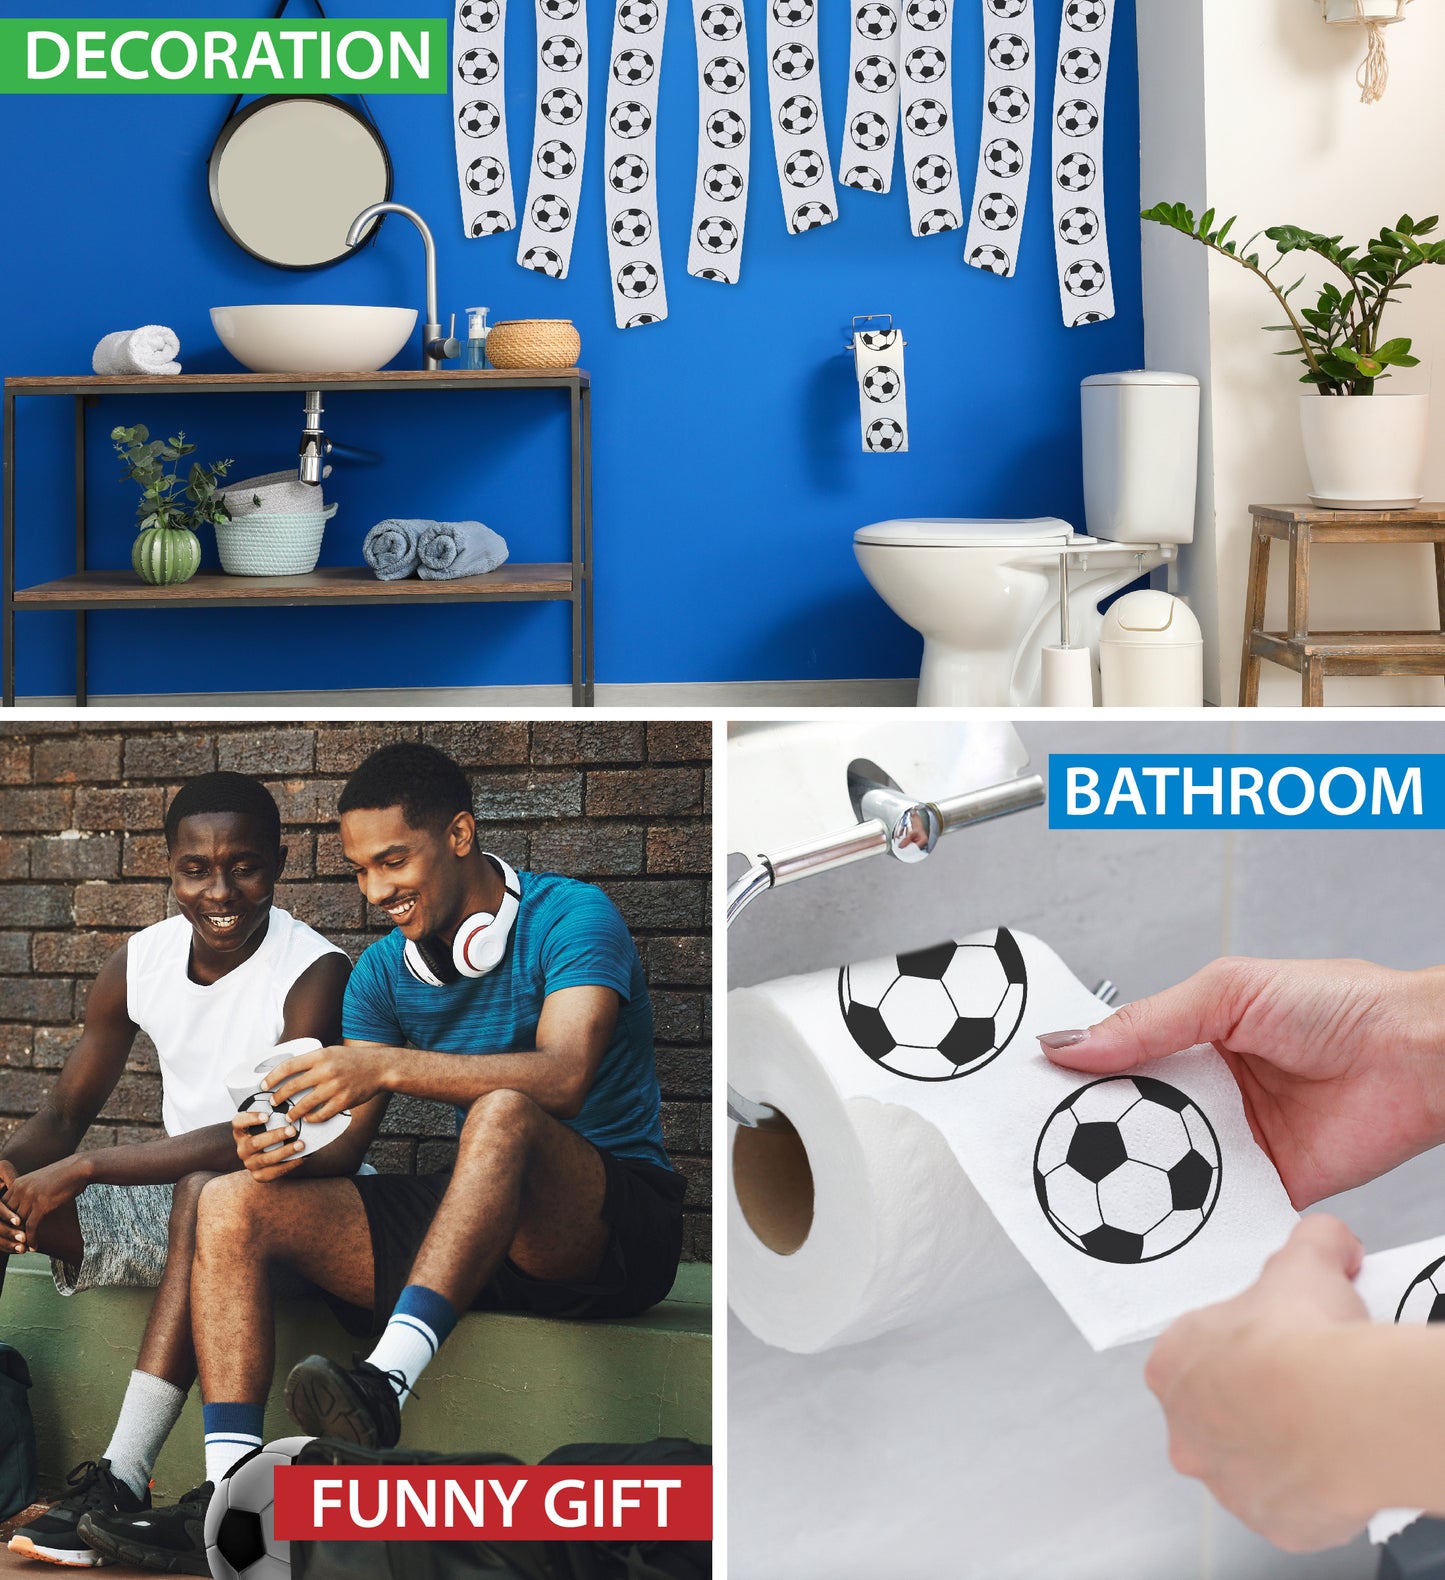 Printed TP Fun Sports Games Printed Toilet Paper Roll - 500 Sheets Soccer